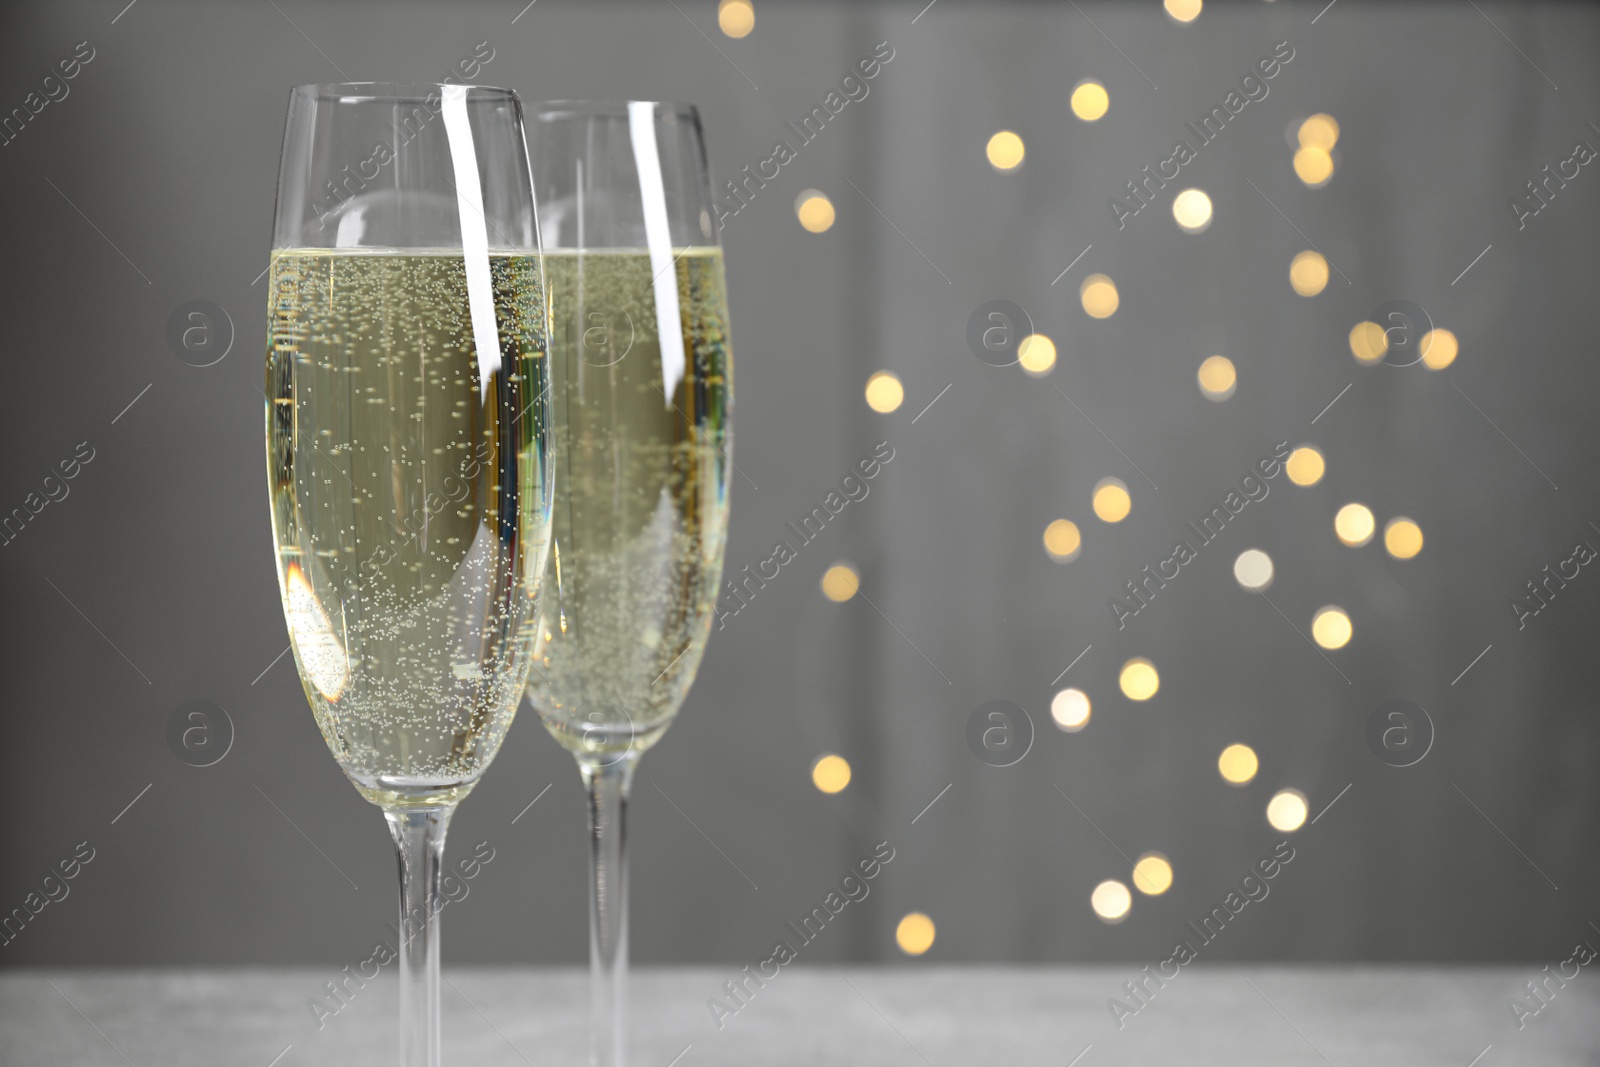 Photo of Glasses of champagne on light grey background with blurred lights. Space for text